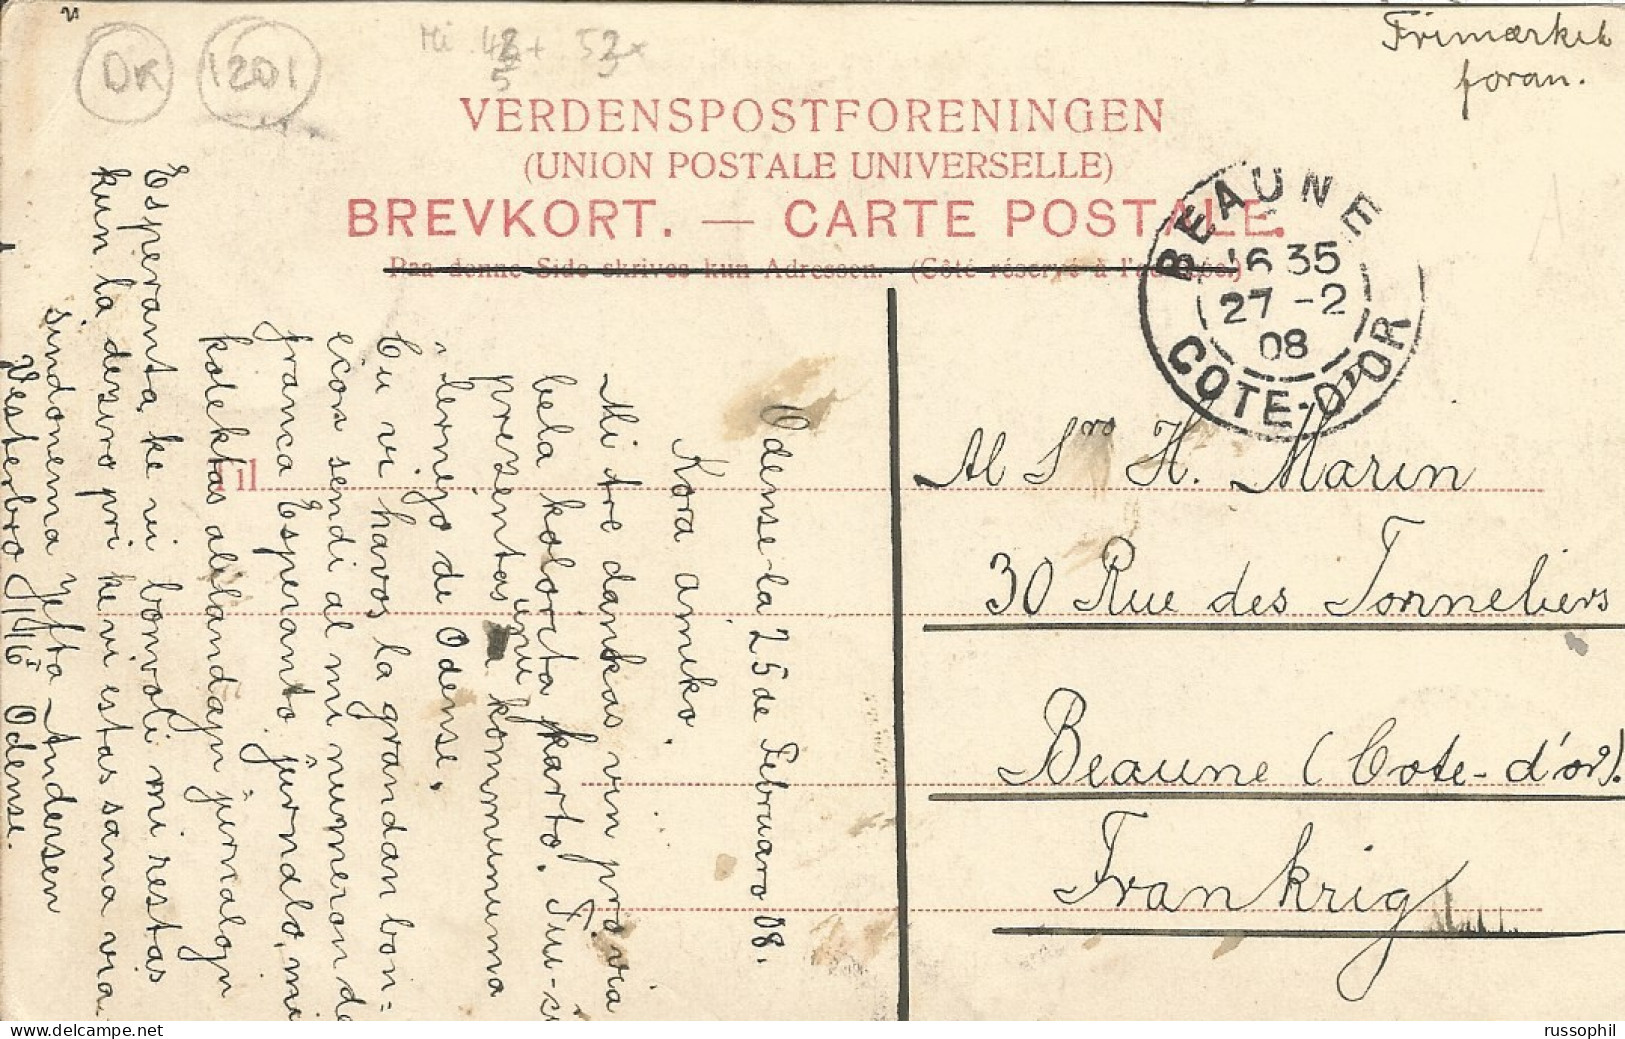 DENMARK - SPECTACULAR 6 STAMP FRANKING (10 ORE) ON PC (VIEW OF ODENSEE) TO FRANCE - 1908 - Brieven En Documenten